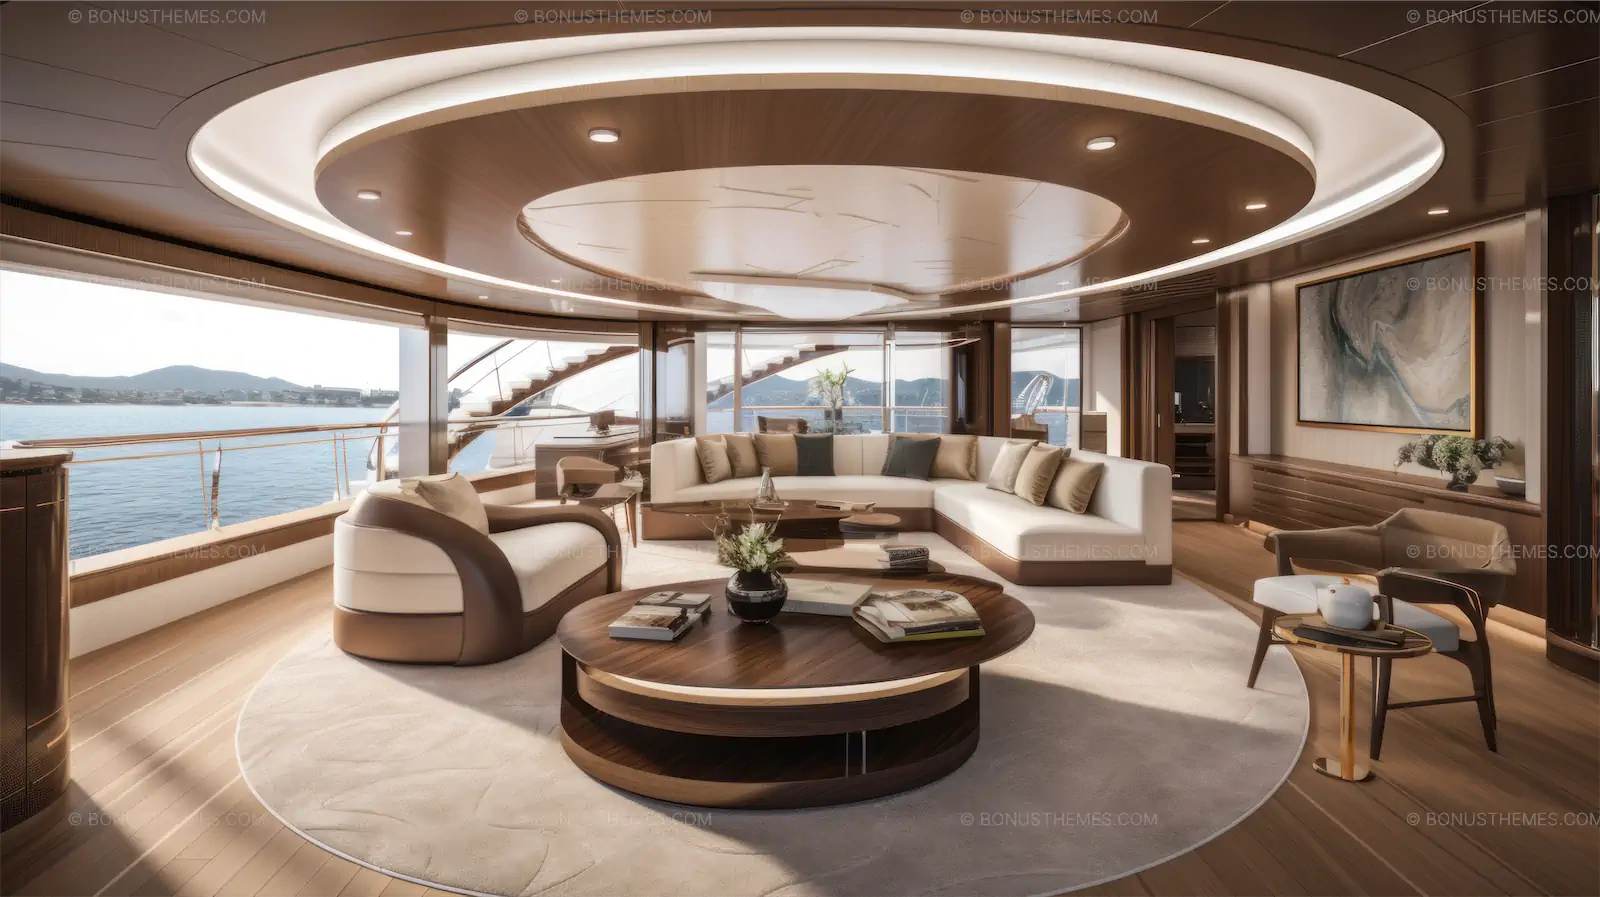 Elegant yacht with curved lines and warm wood tones